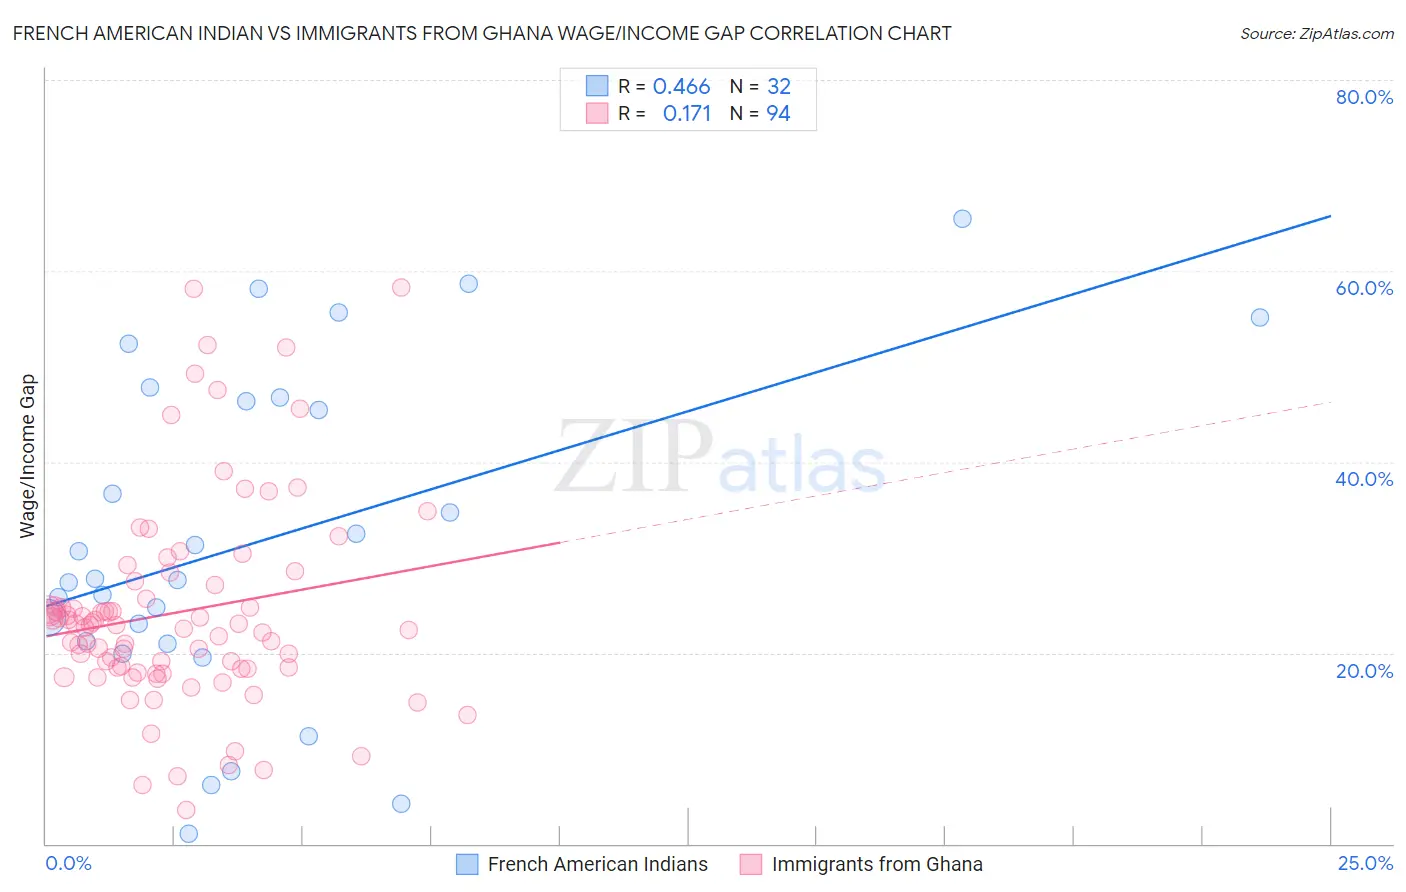 French American Indian vs Immigrants from Ghana Wage/Income Gap